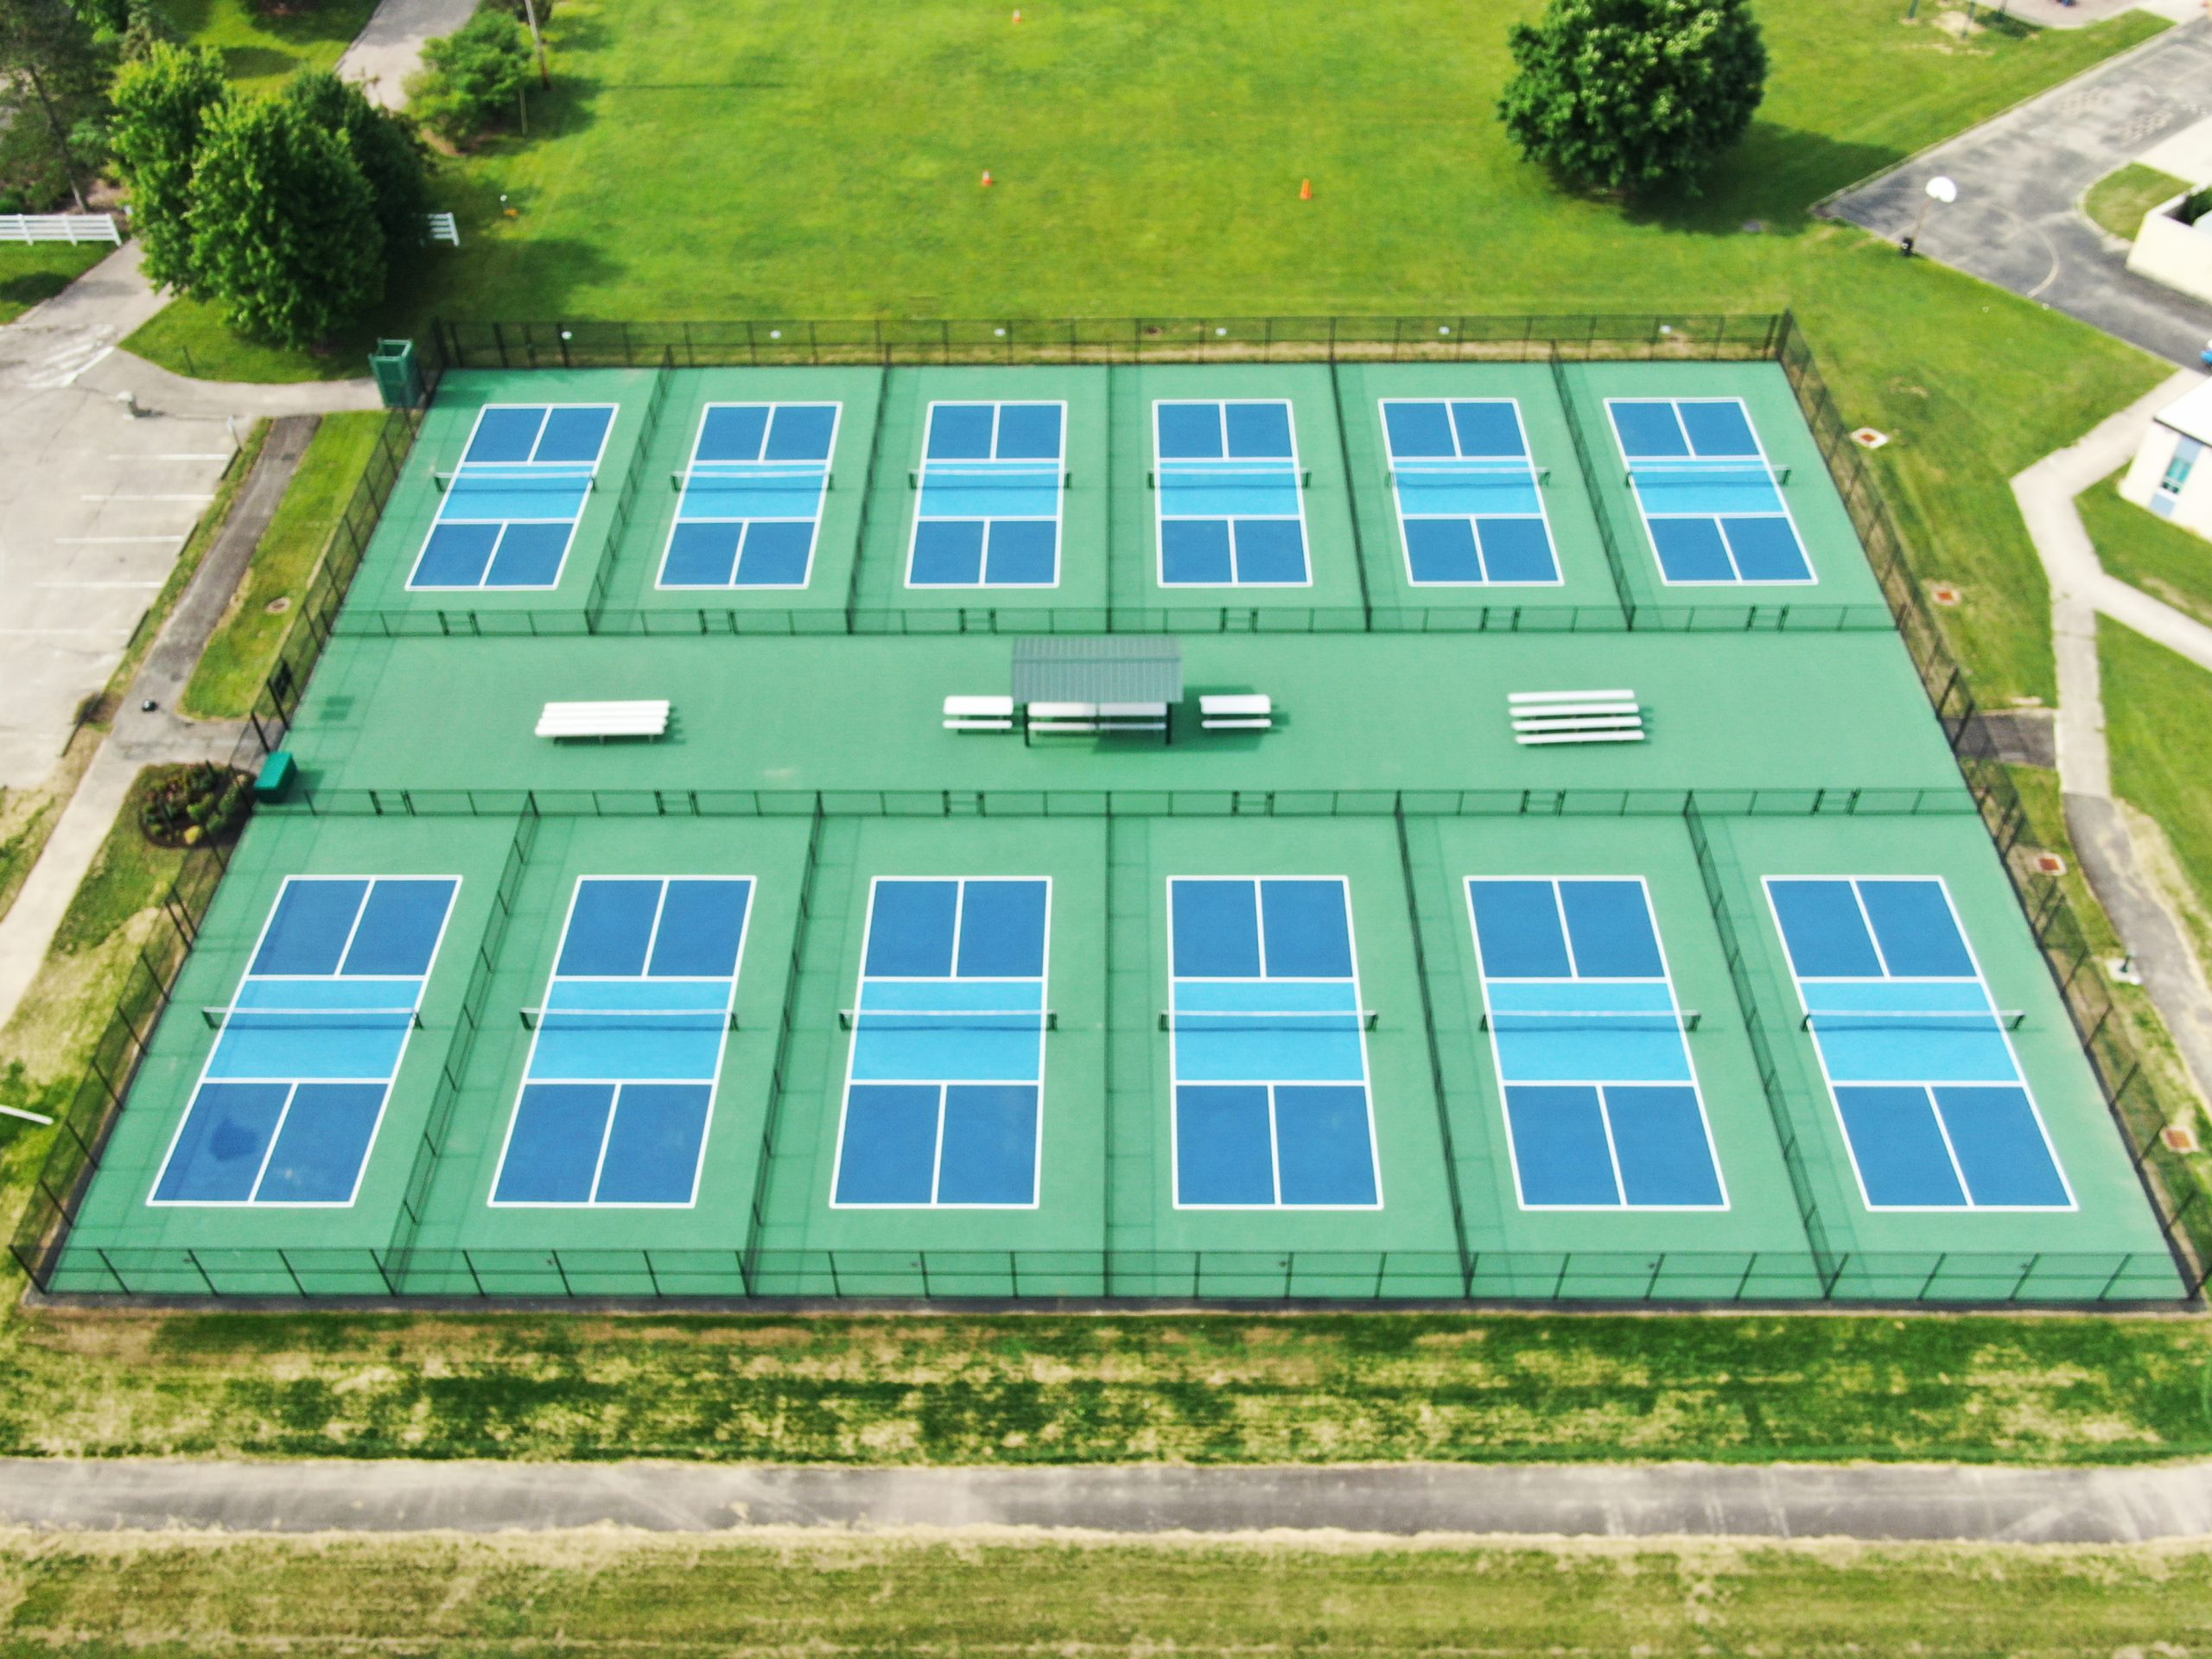 Drone image of all 12 Kennedy Pickleball Courts